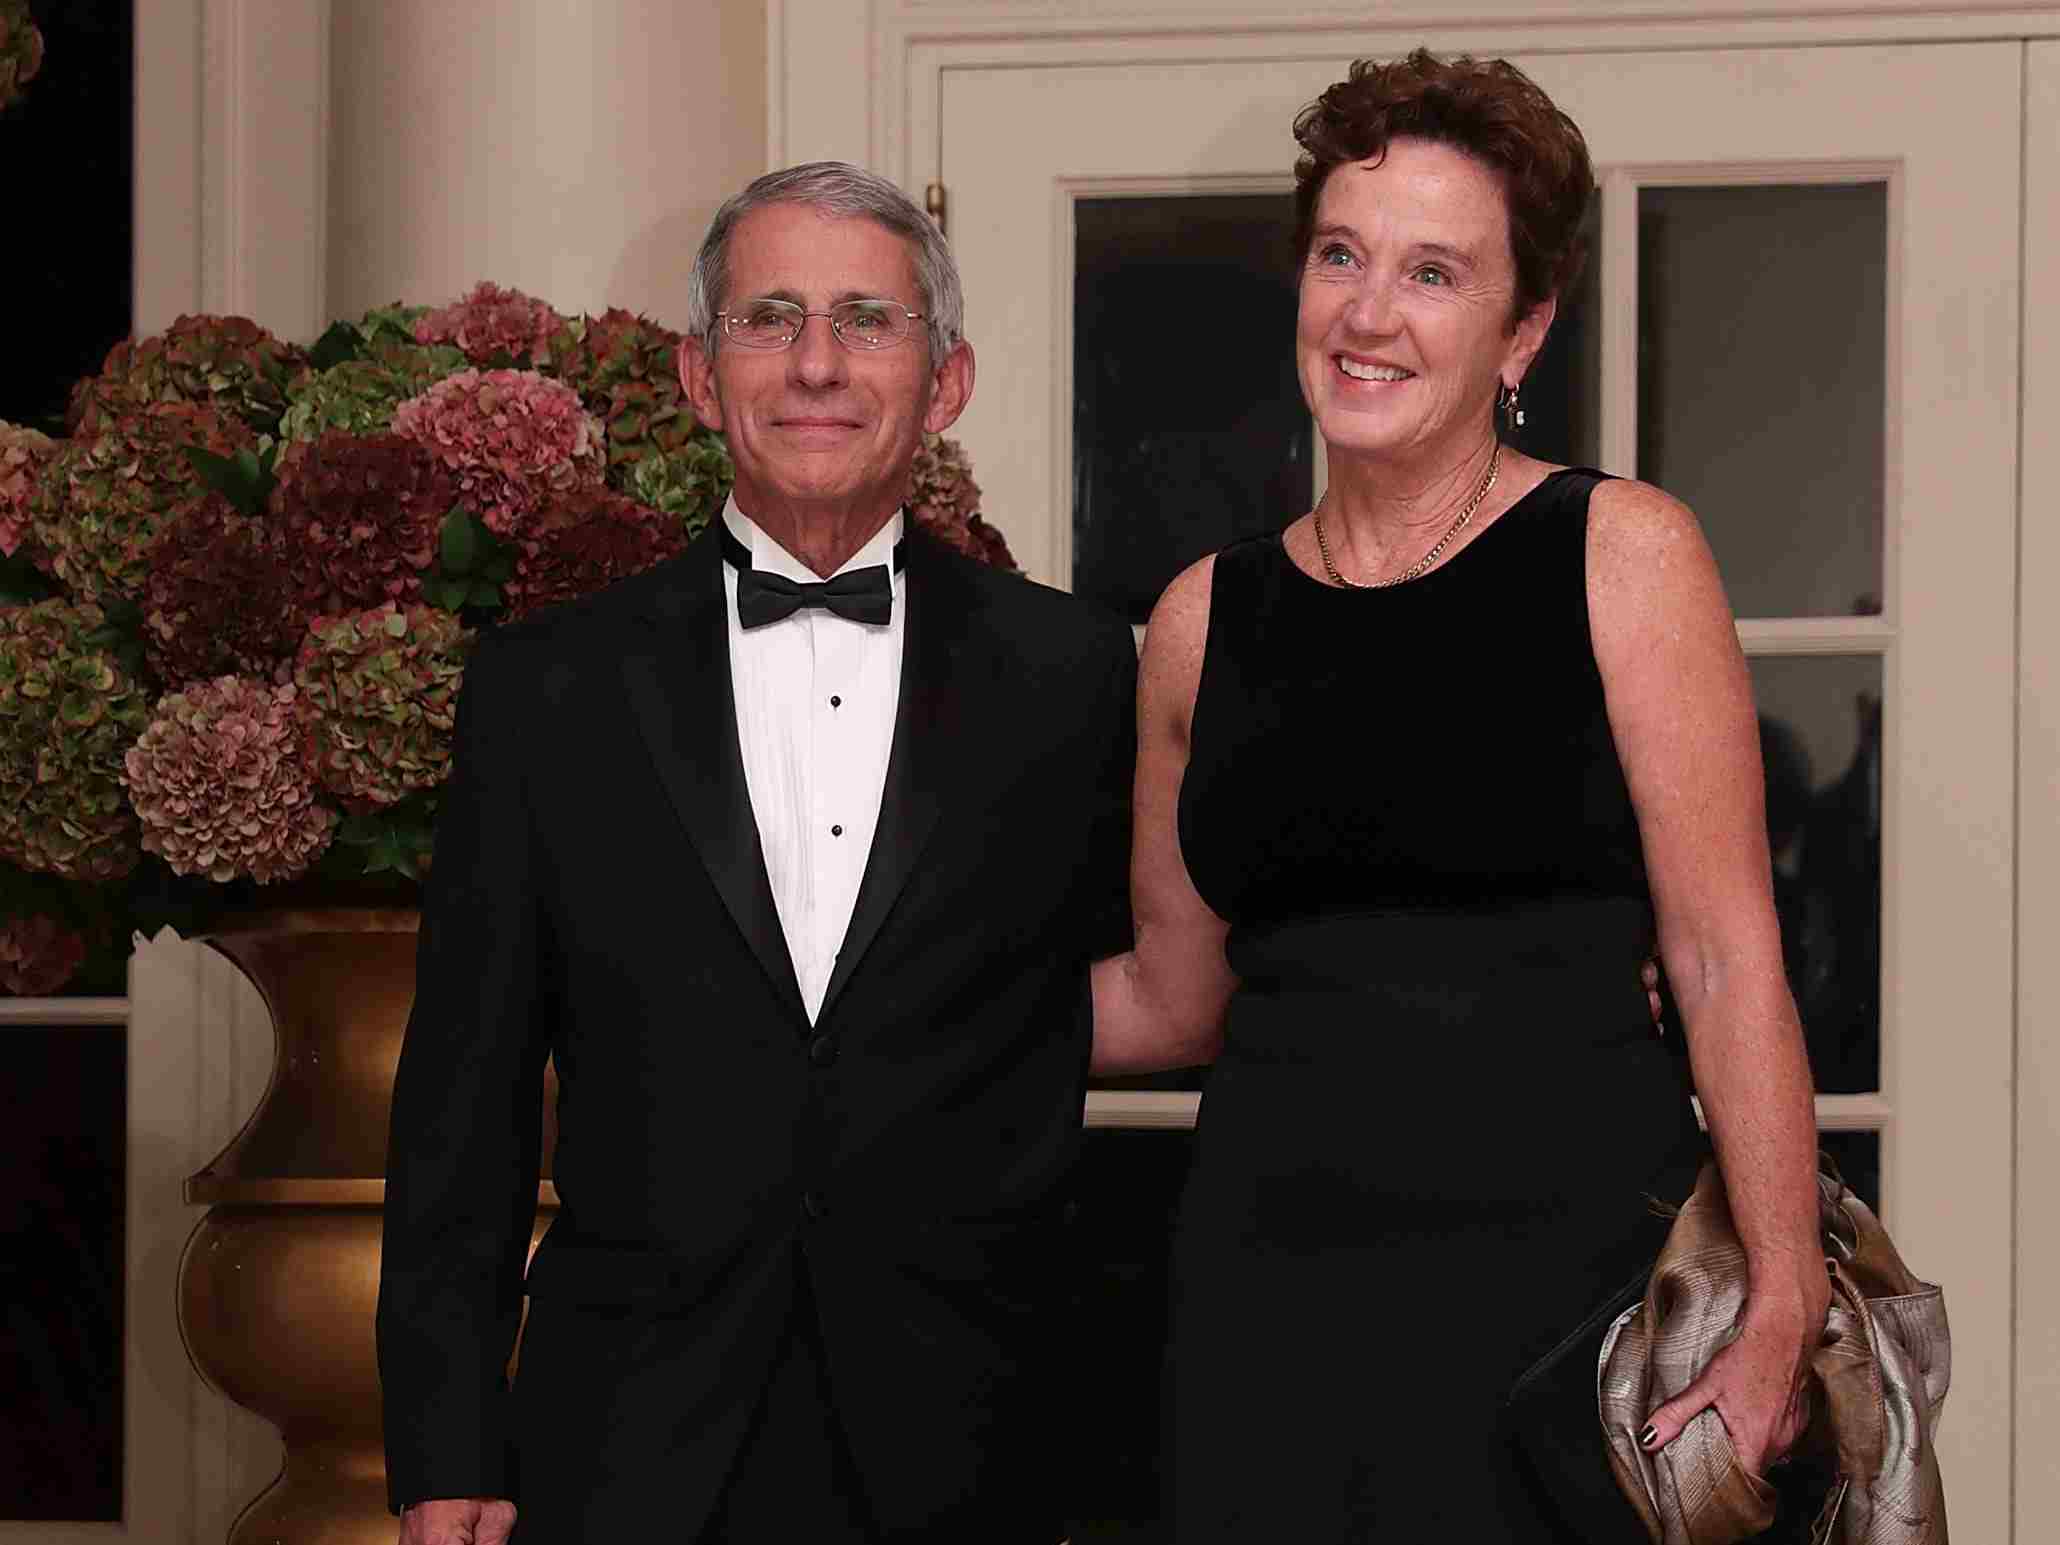 Image of a successful doctor, Dr. Anthony Fauci and his wife